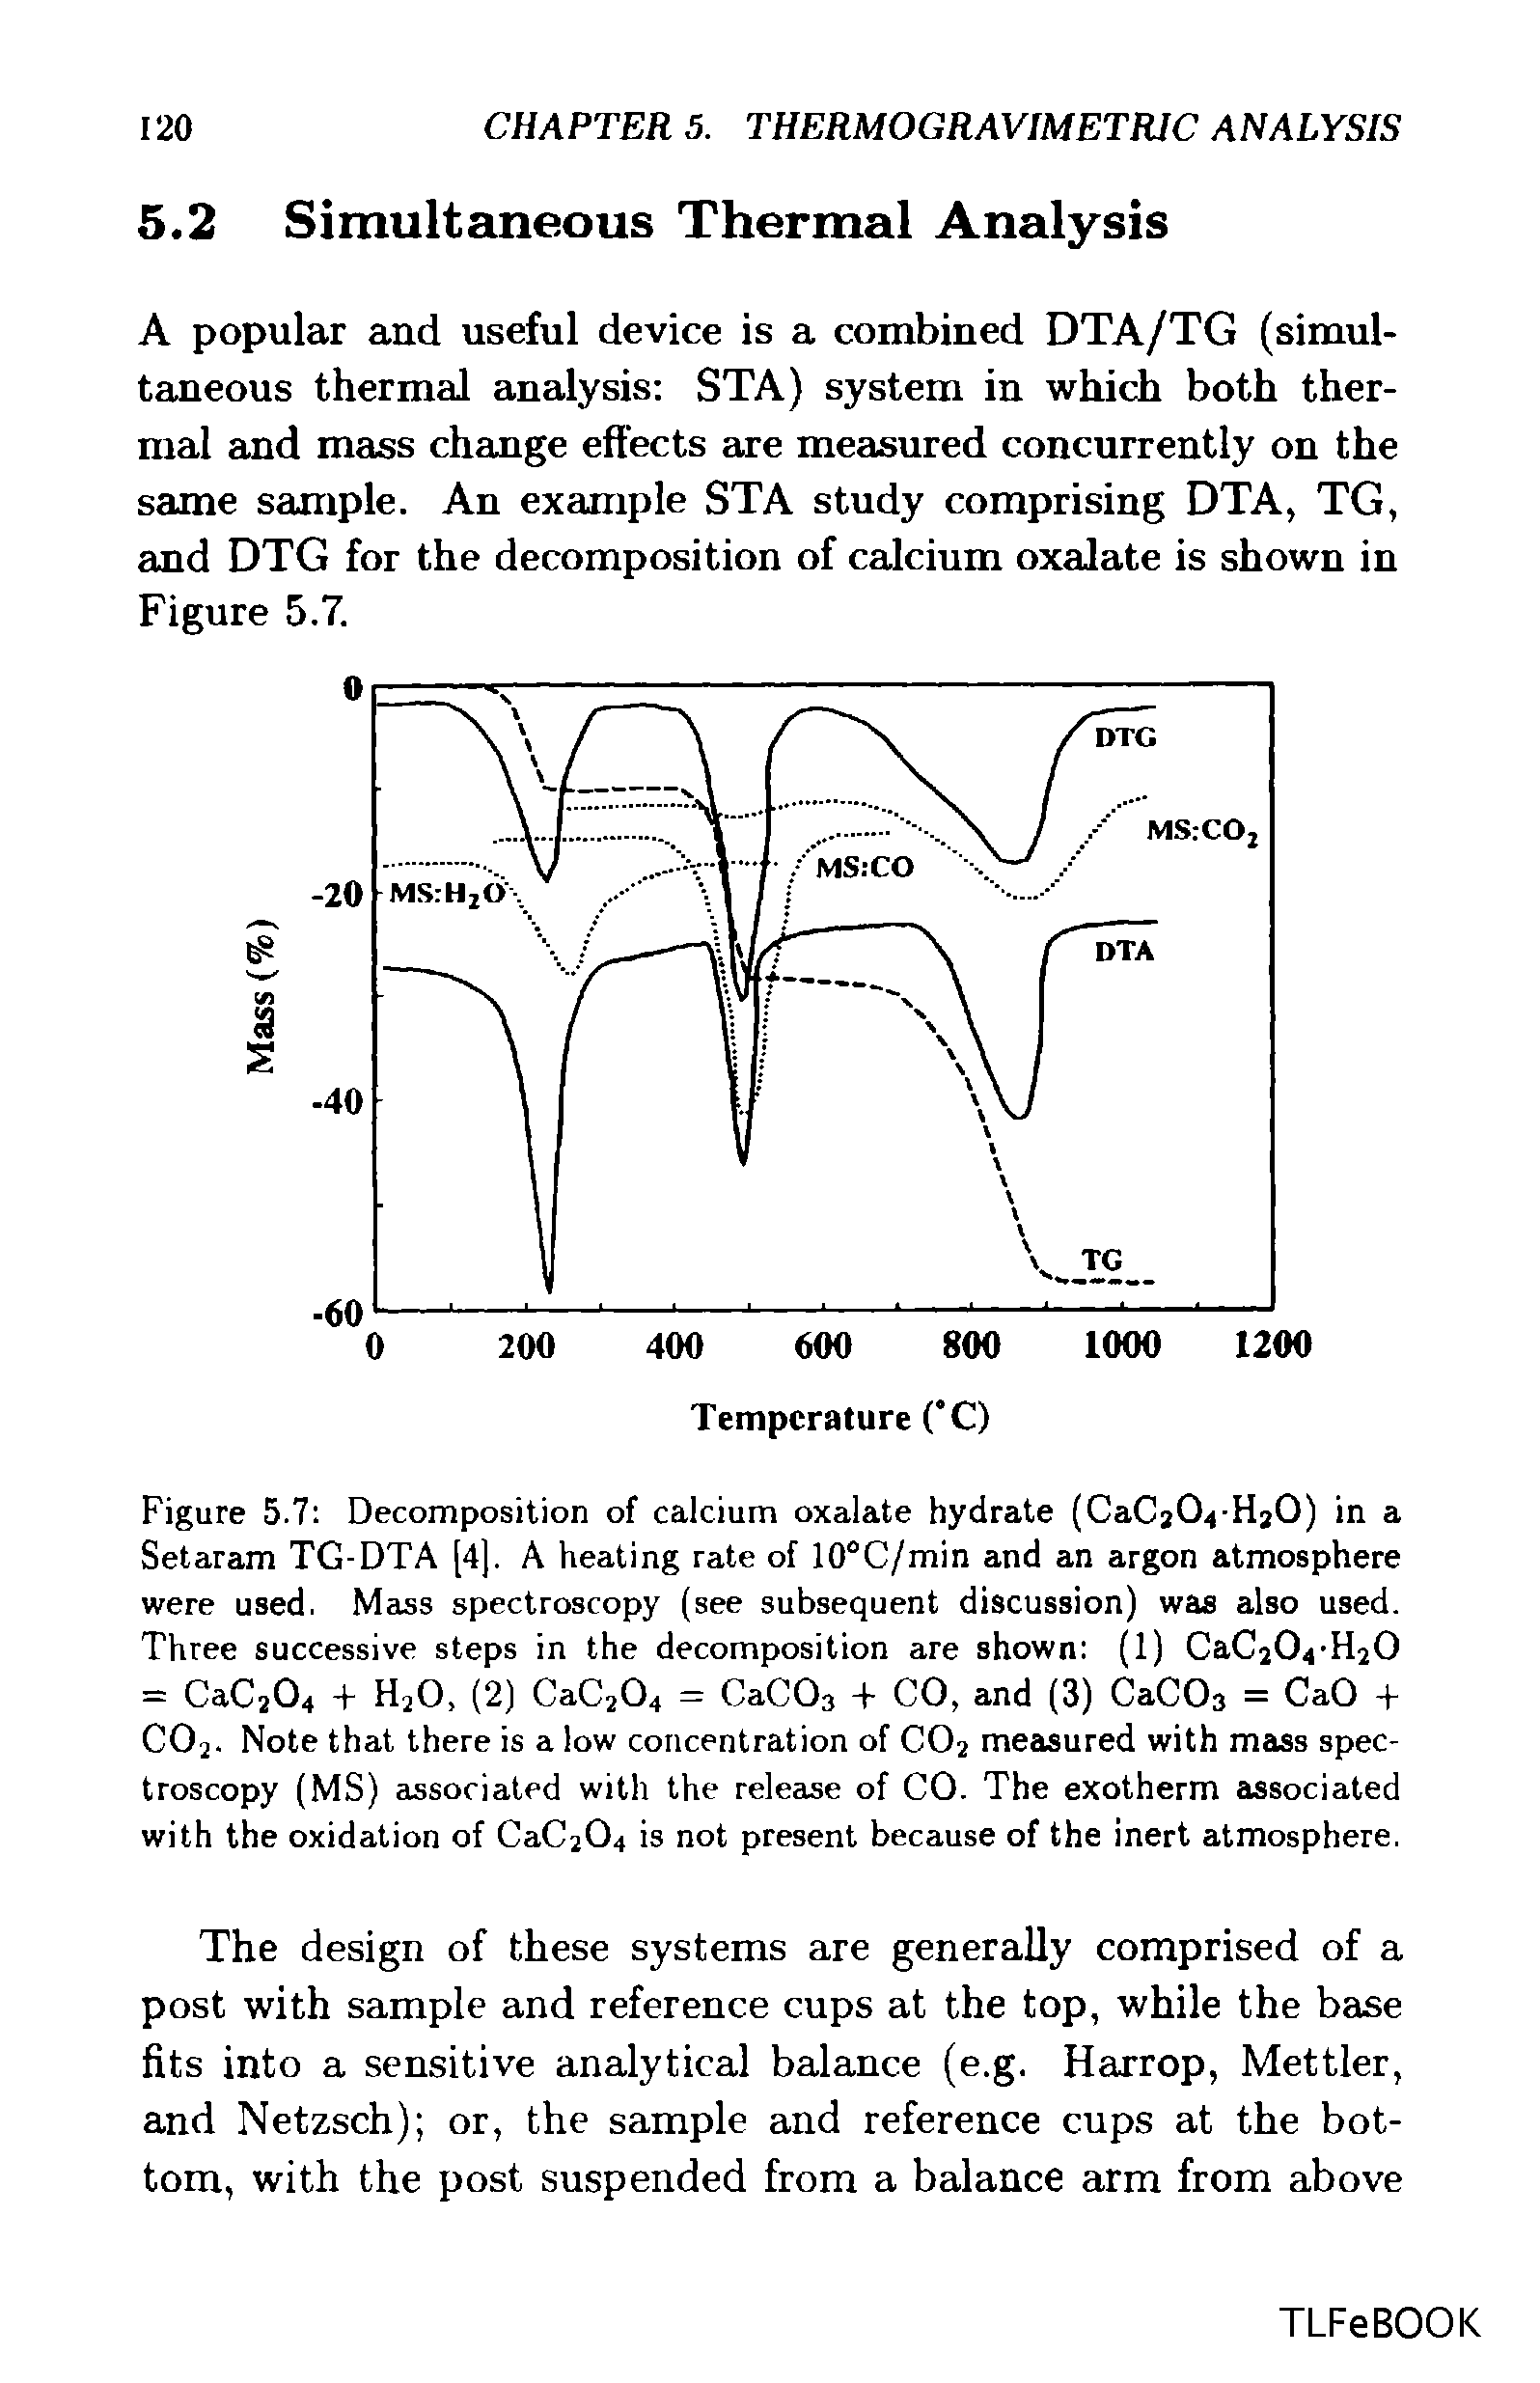 Figure 5.7 Decomposition of calcium oxalate hydrate (CaC204-H20) in a Setaram TG-DTA [4], A heating rate of 10°C/min and an argon atmosphere were used. Mass spectroscopy (see subsequent discussion) was also used. Three successive steps in the decomposition are shown (1) CaC204-H20 = CaC204 + H20, (2) CaC204 = CaC03 + CO, and (3) CaC03 = CaO + C02. Note that there is a low concentration of C02 measured with mass spectroscopy (MS) associated with the release of CO. The exotherm associated with the oxidation of CaC204 is not present because of the inert atmosphere.